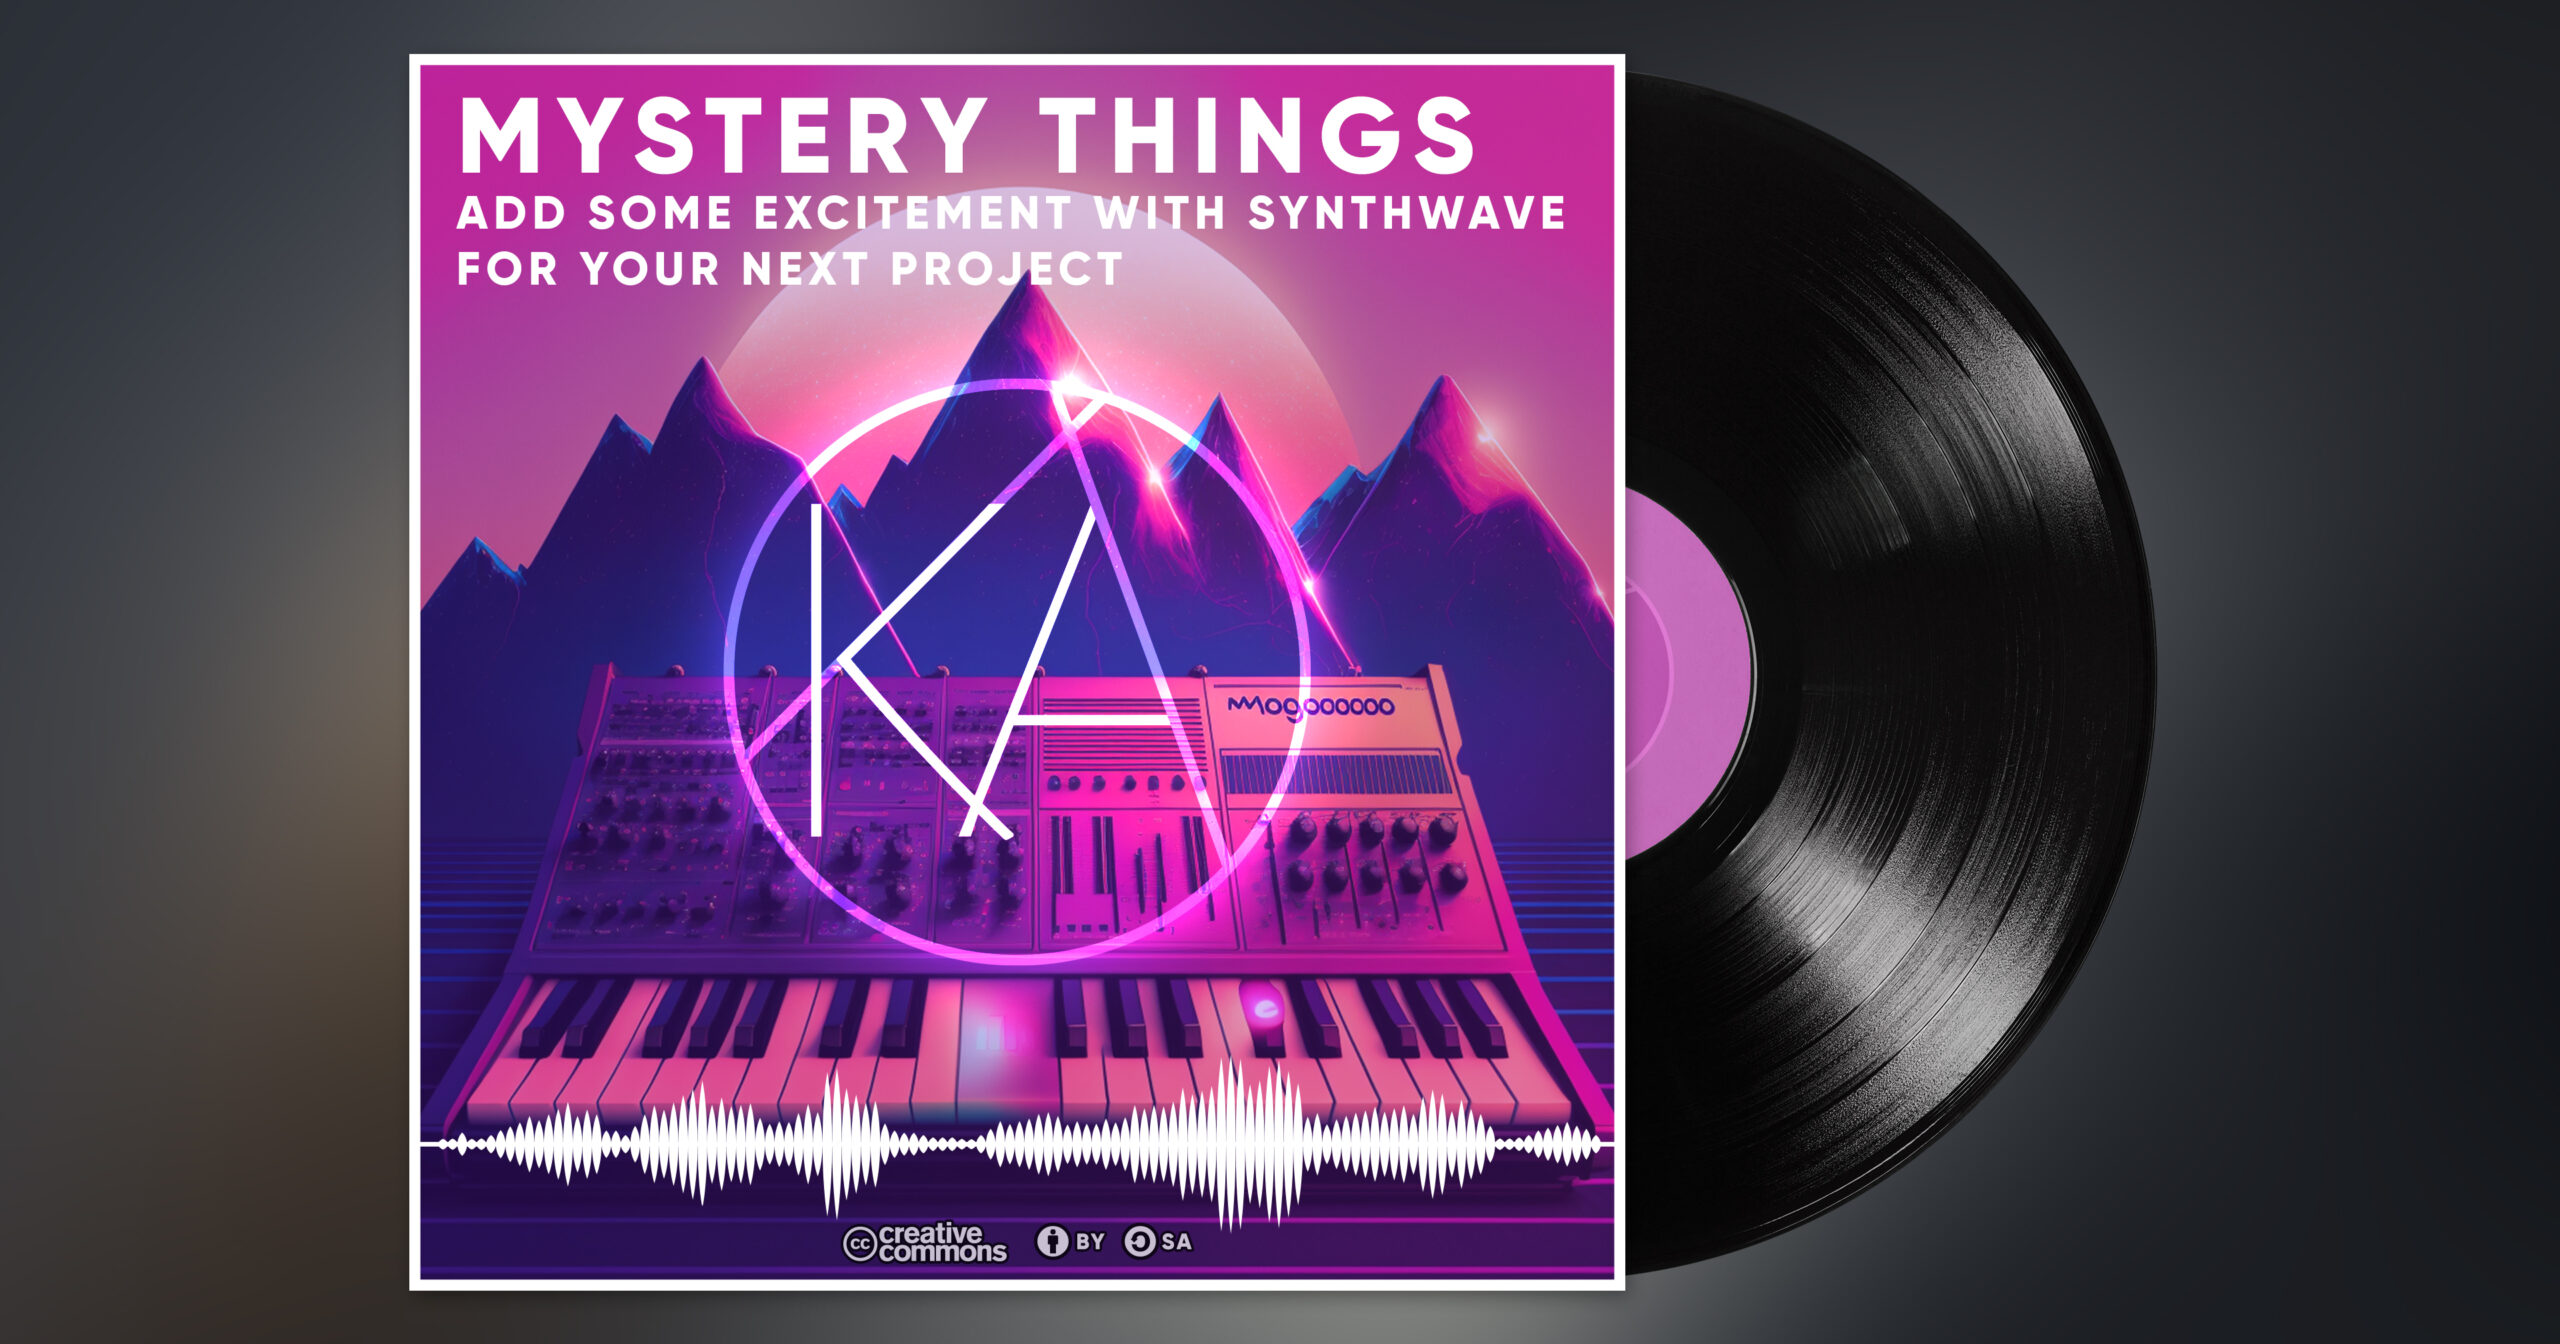 Whether you're looking for the perfect song to enhance a movie scene, or you want to add some SynthWave to your next Podcast, Mystery Things is a great choice.